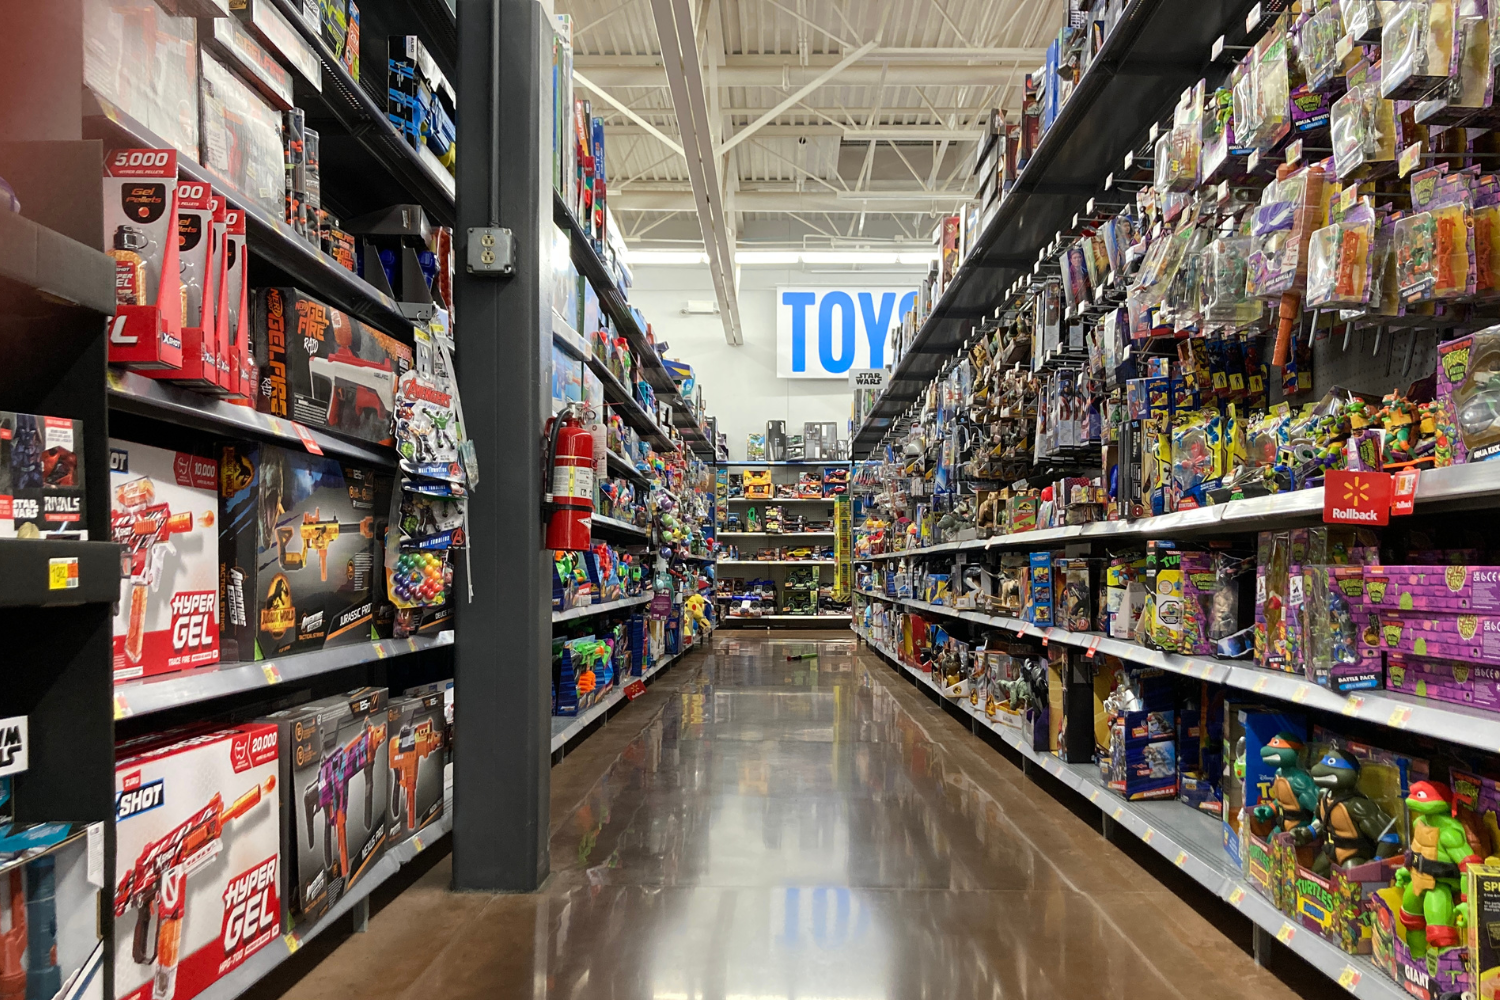 The boys toy aisle at a local Walmart